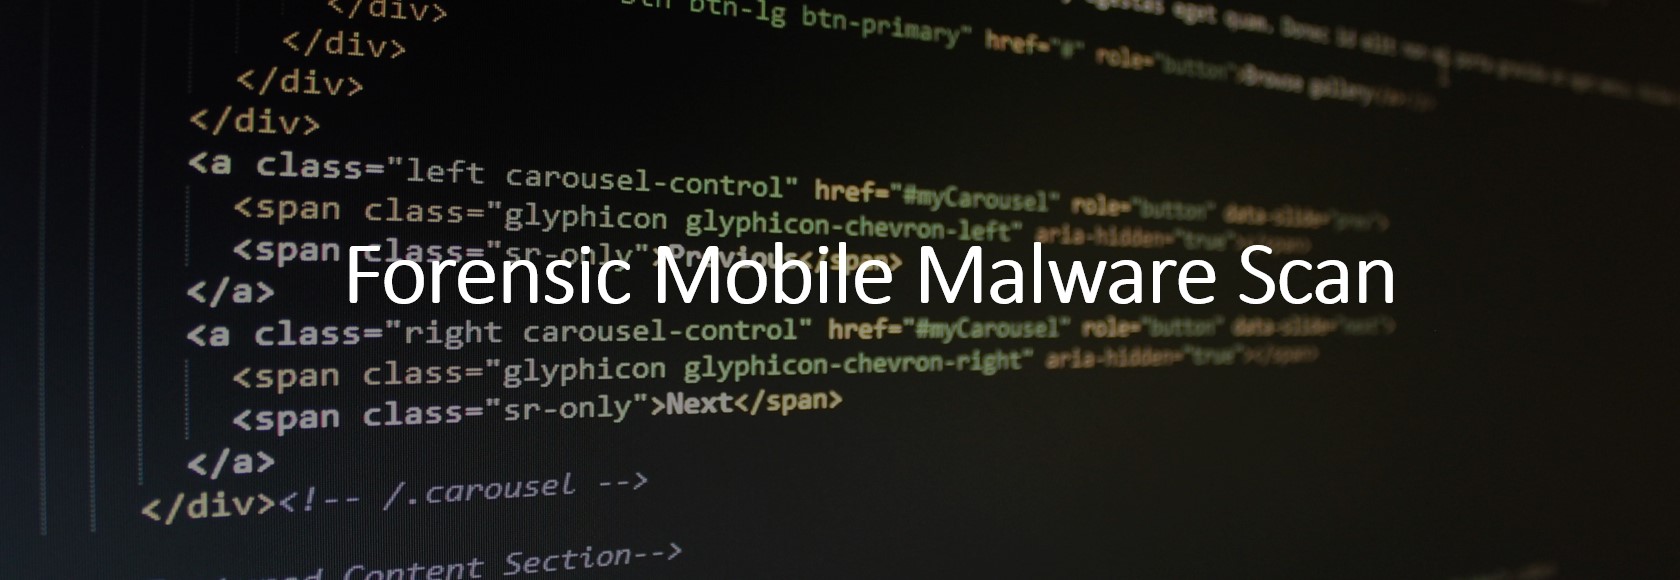 Malware Scan for mobile Device